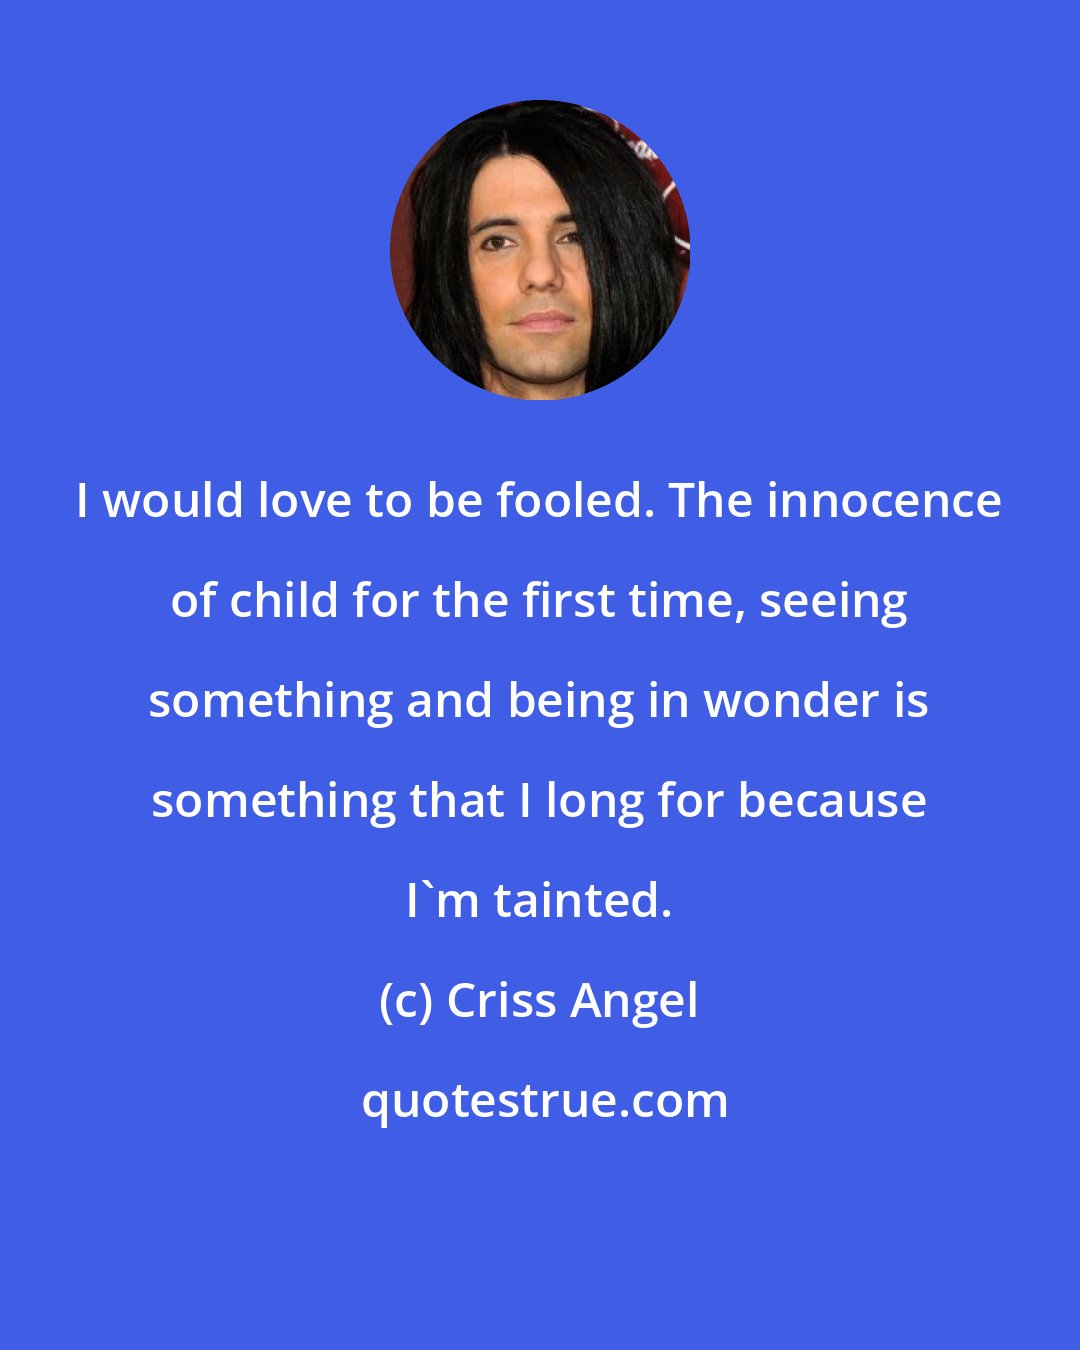 Criss Angel: I would love to be fooled. The innocence of child for the first time, seeing something and being in wonder is something that I long for because I'm tainted.